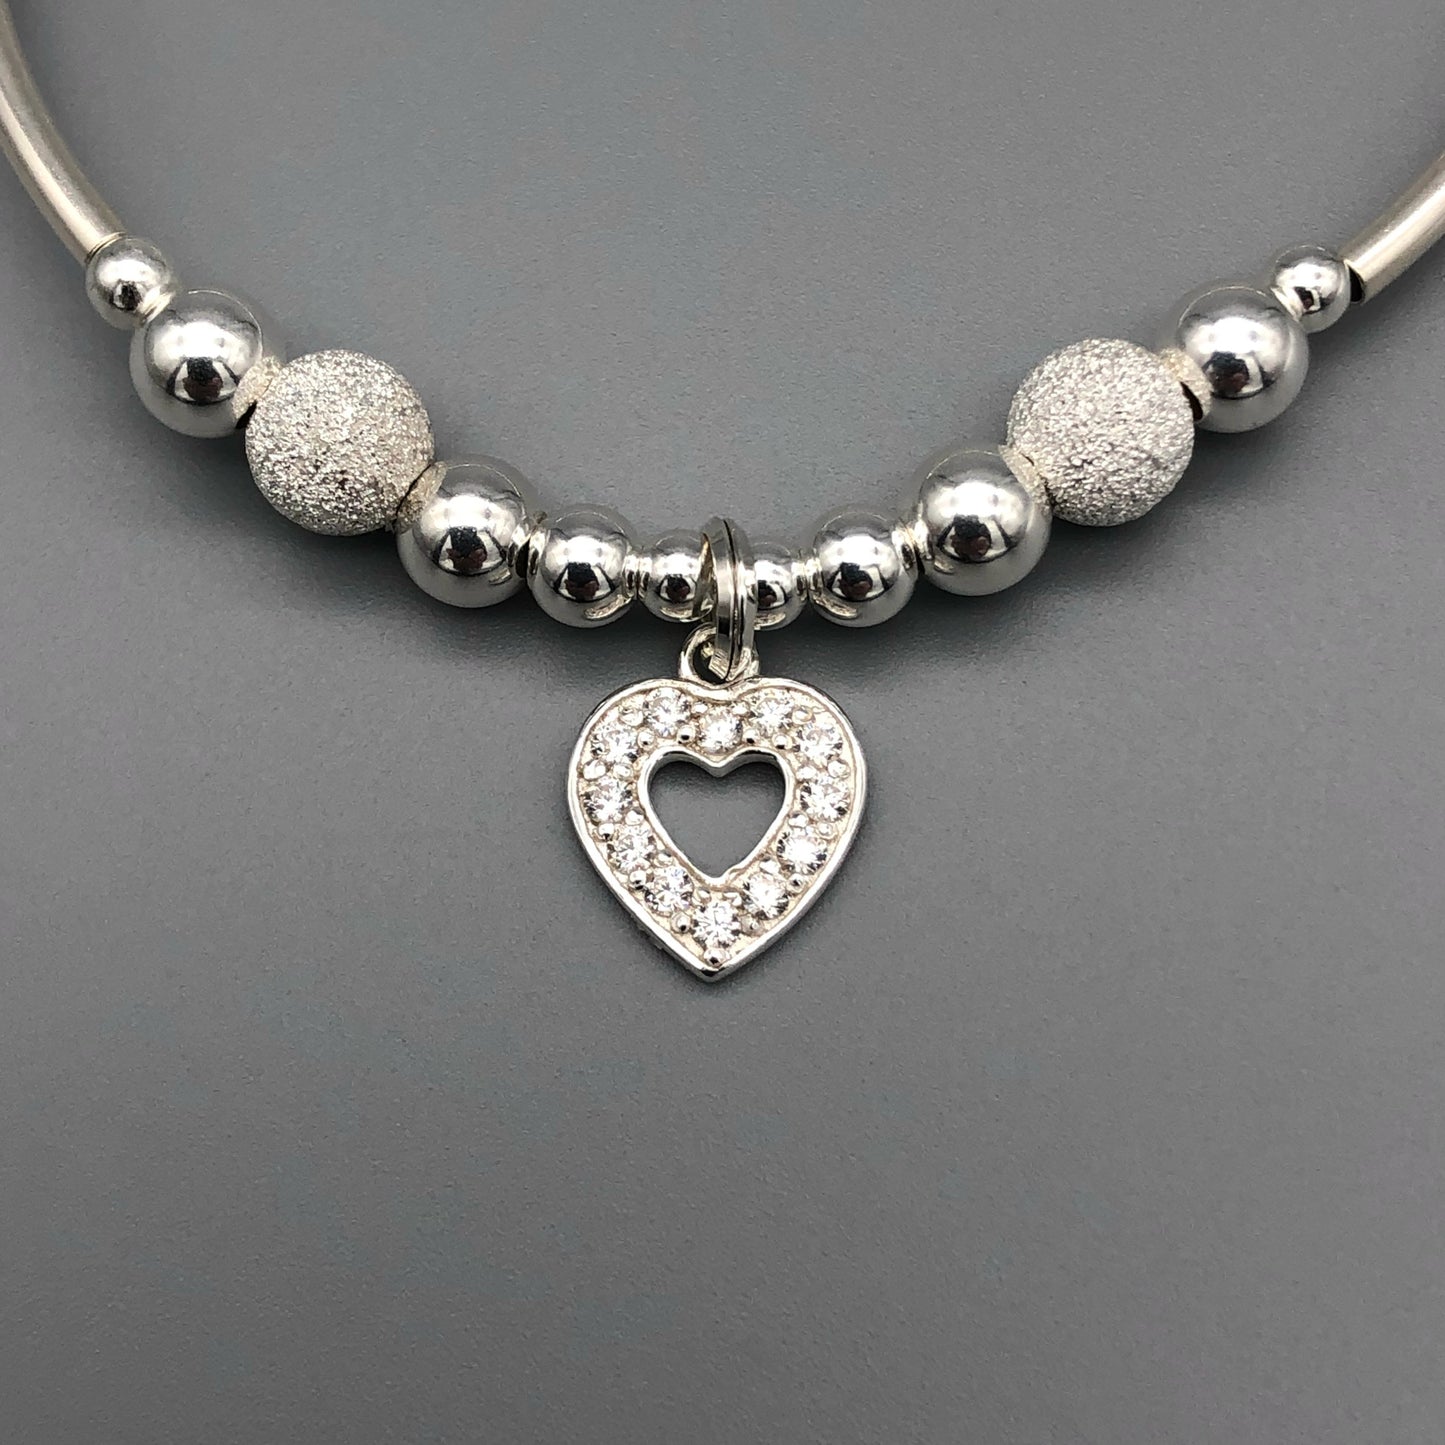 Closeup of Diamond heart charm starburst beads sterling silver hand-made girl's stacking bracelet by My Silver Wish